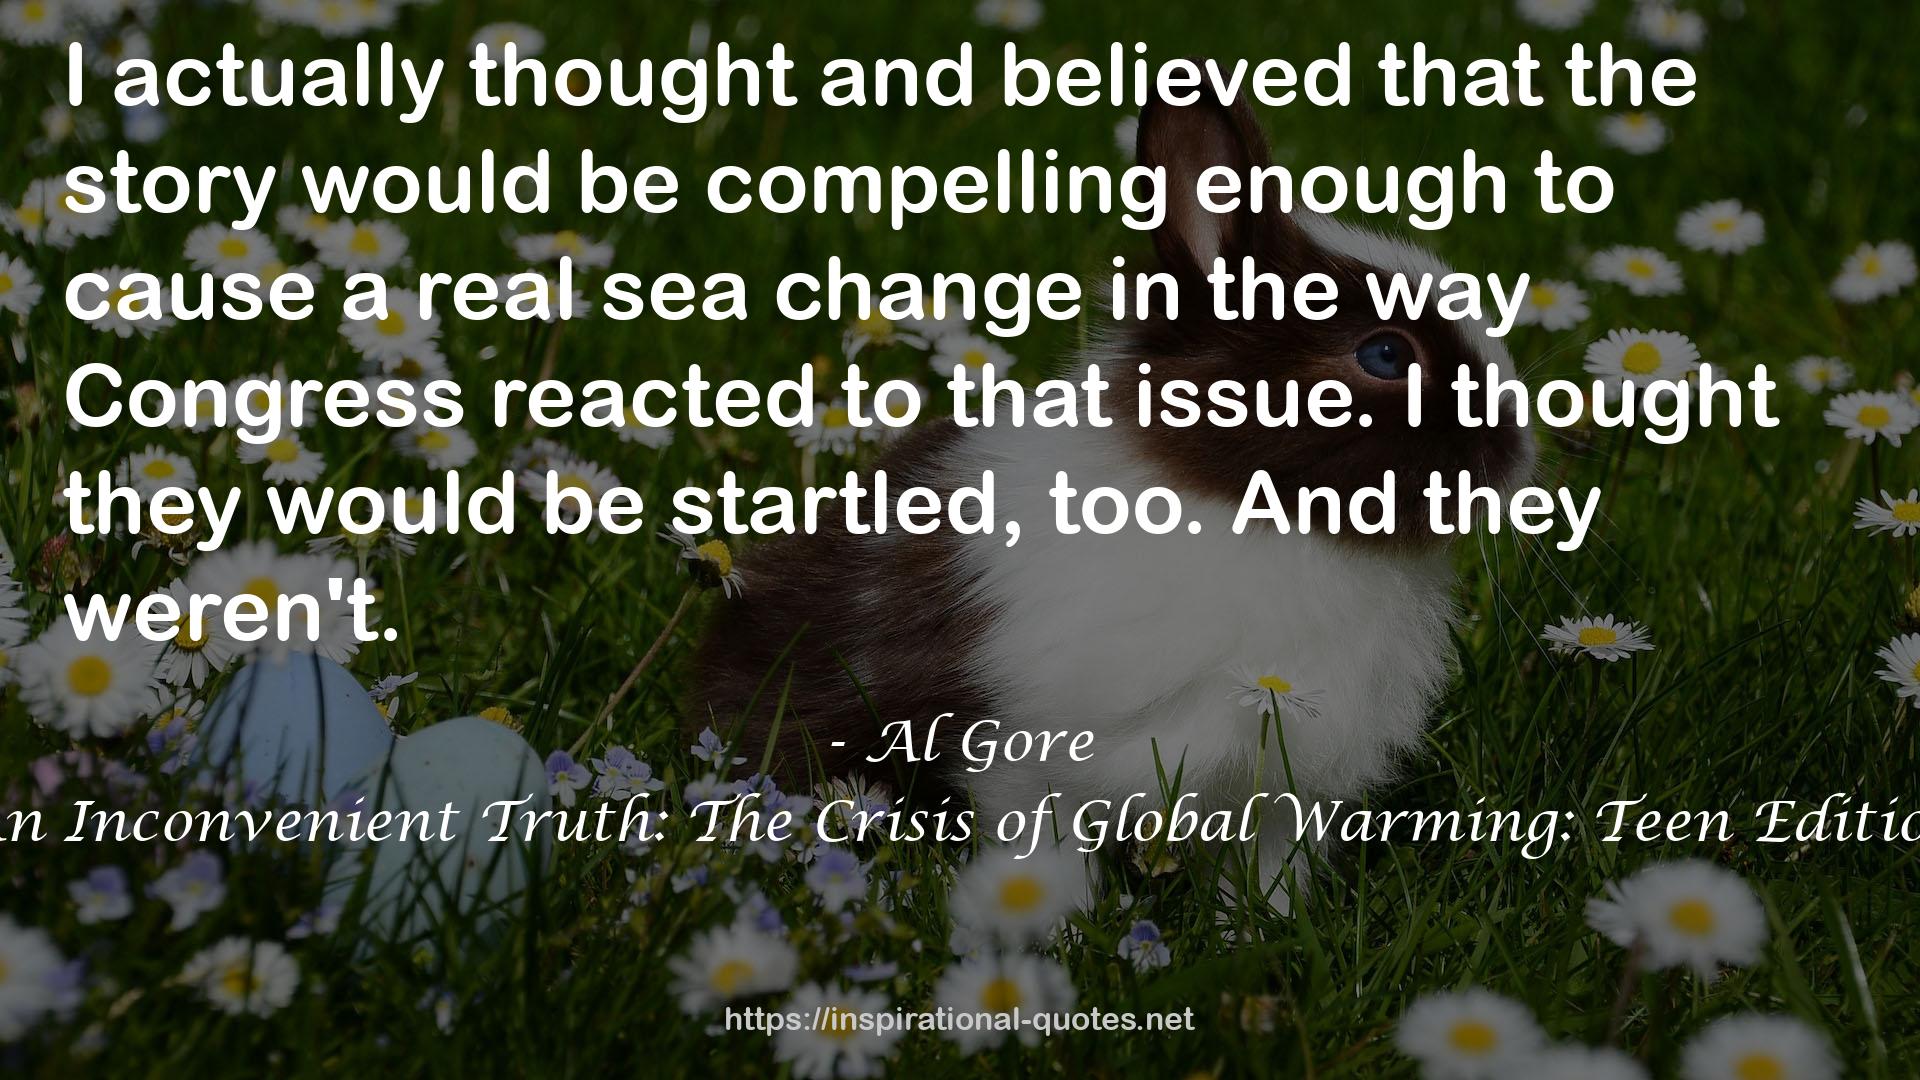 An Inconvenient Truth: The Crisis of Global Warming: Teen Edition QUOTES